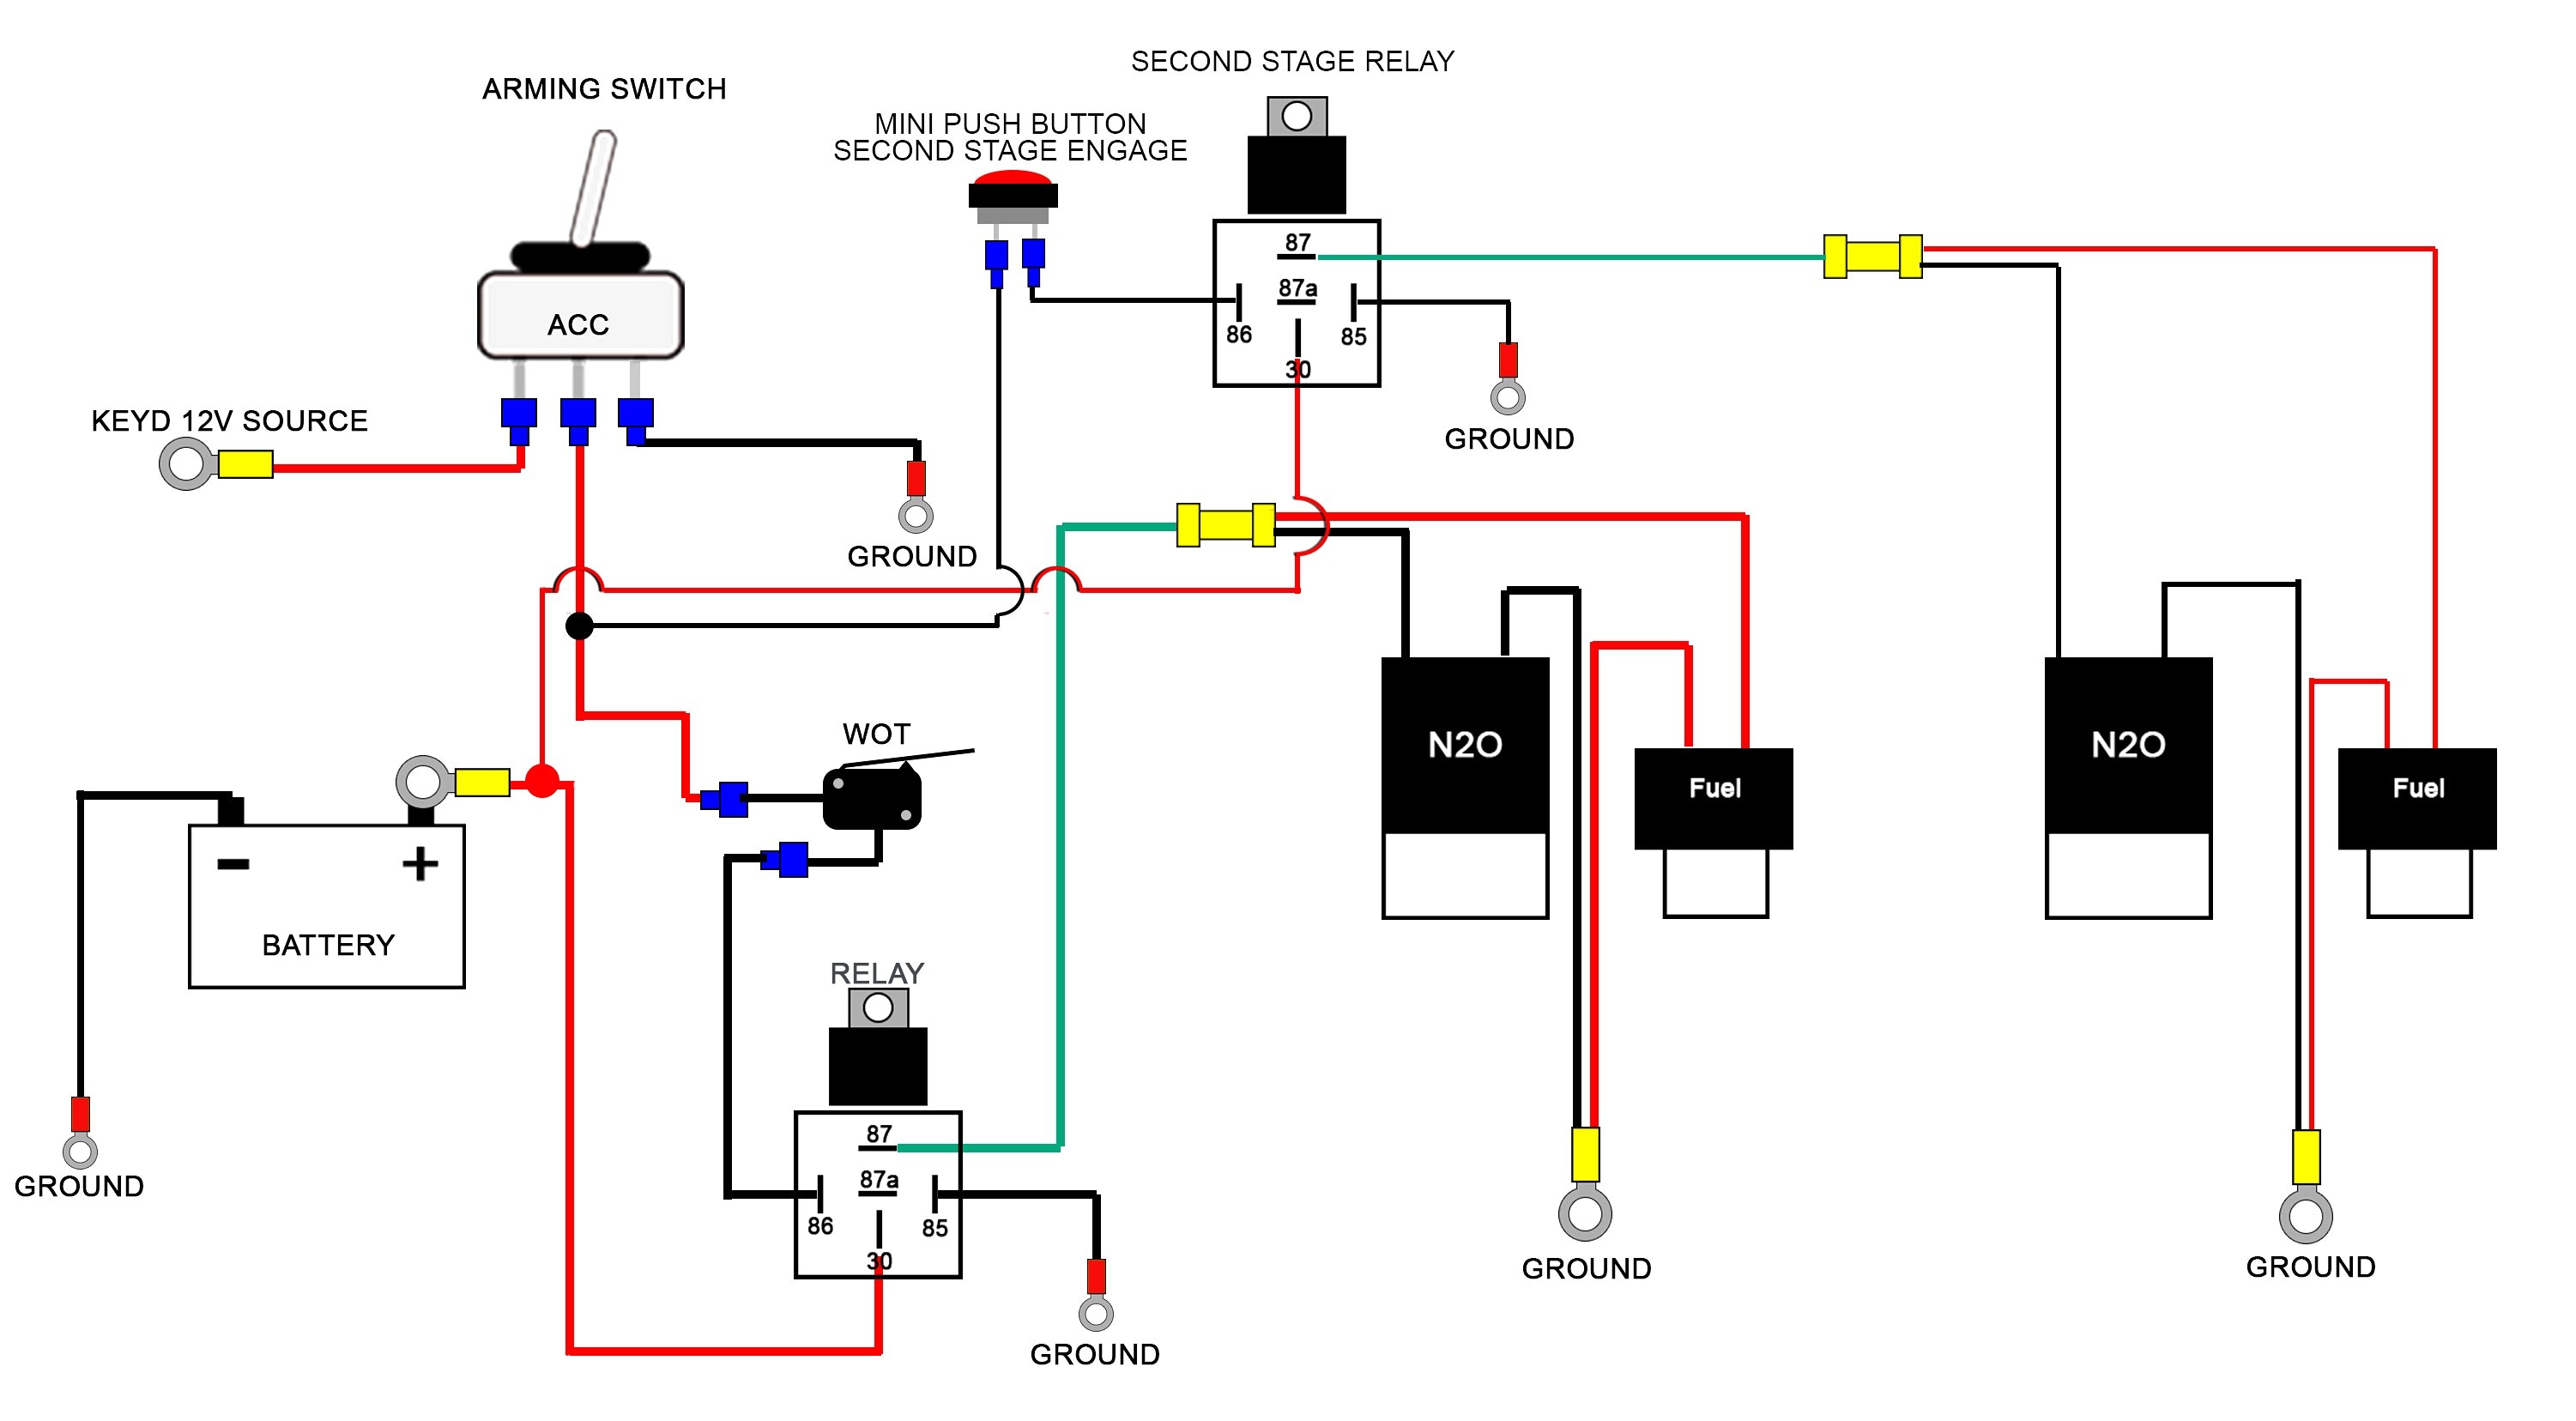 Horn Wiring Diagram with Relay Bosch 12v Relay Wiring Diagram Hd Dump Of Horn Wiring Diagram with Relay